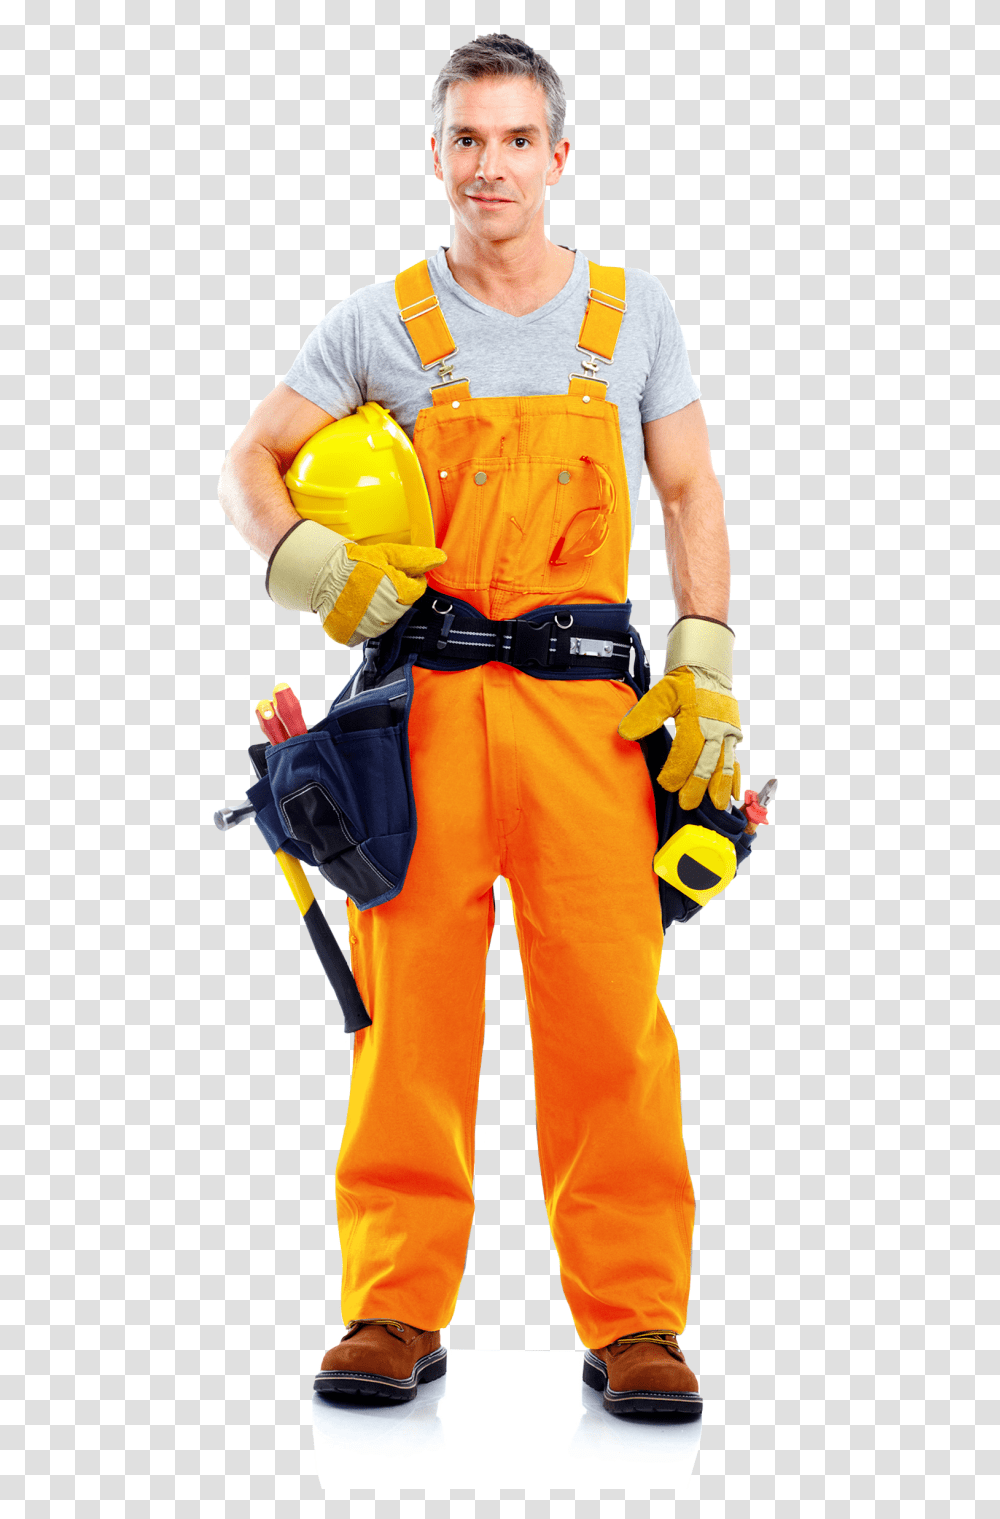 Download Industrail Worker Image For Free Contractor, Clothing, Person, Helmet, Hardhat Transparent Png